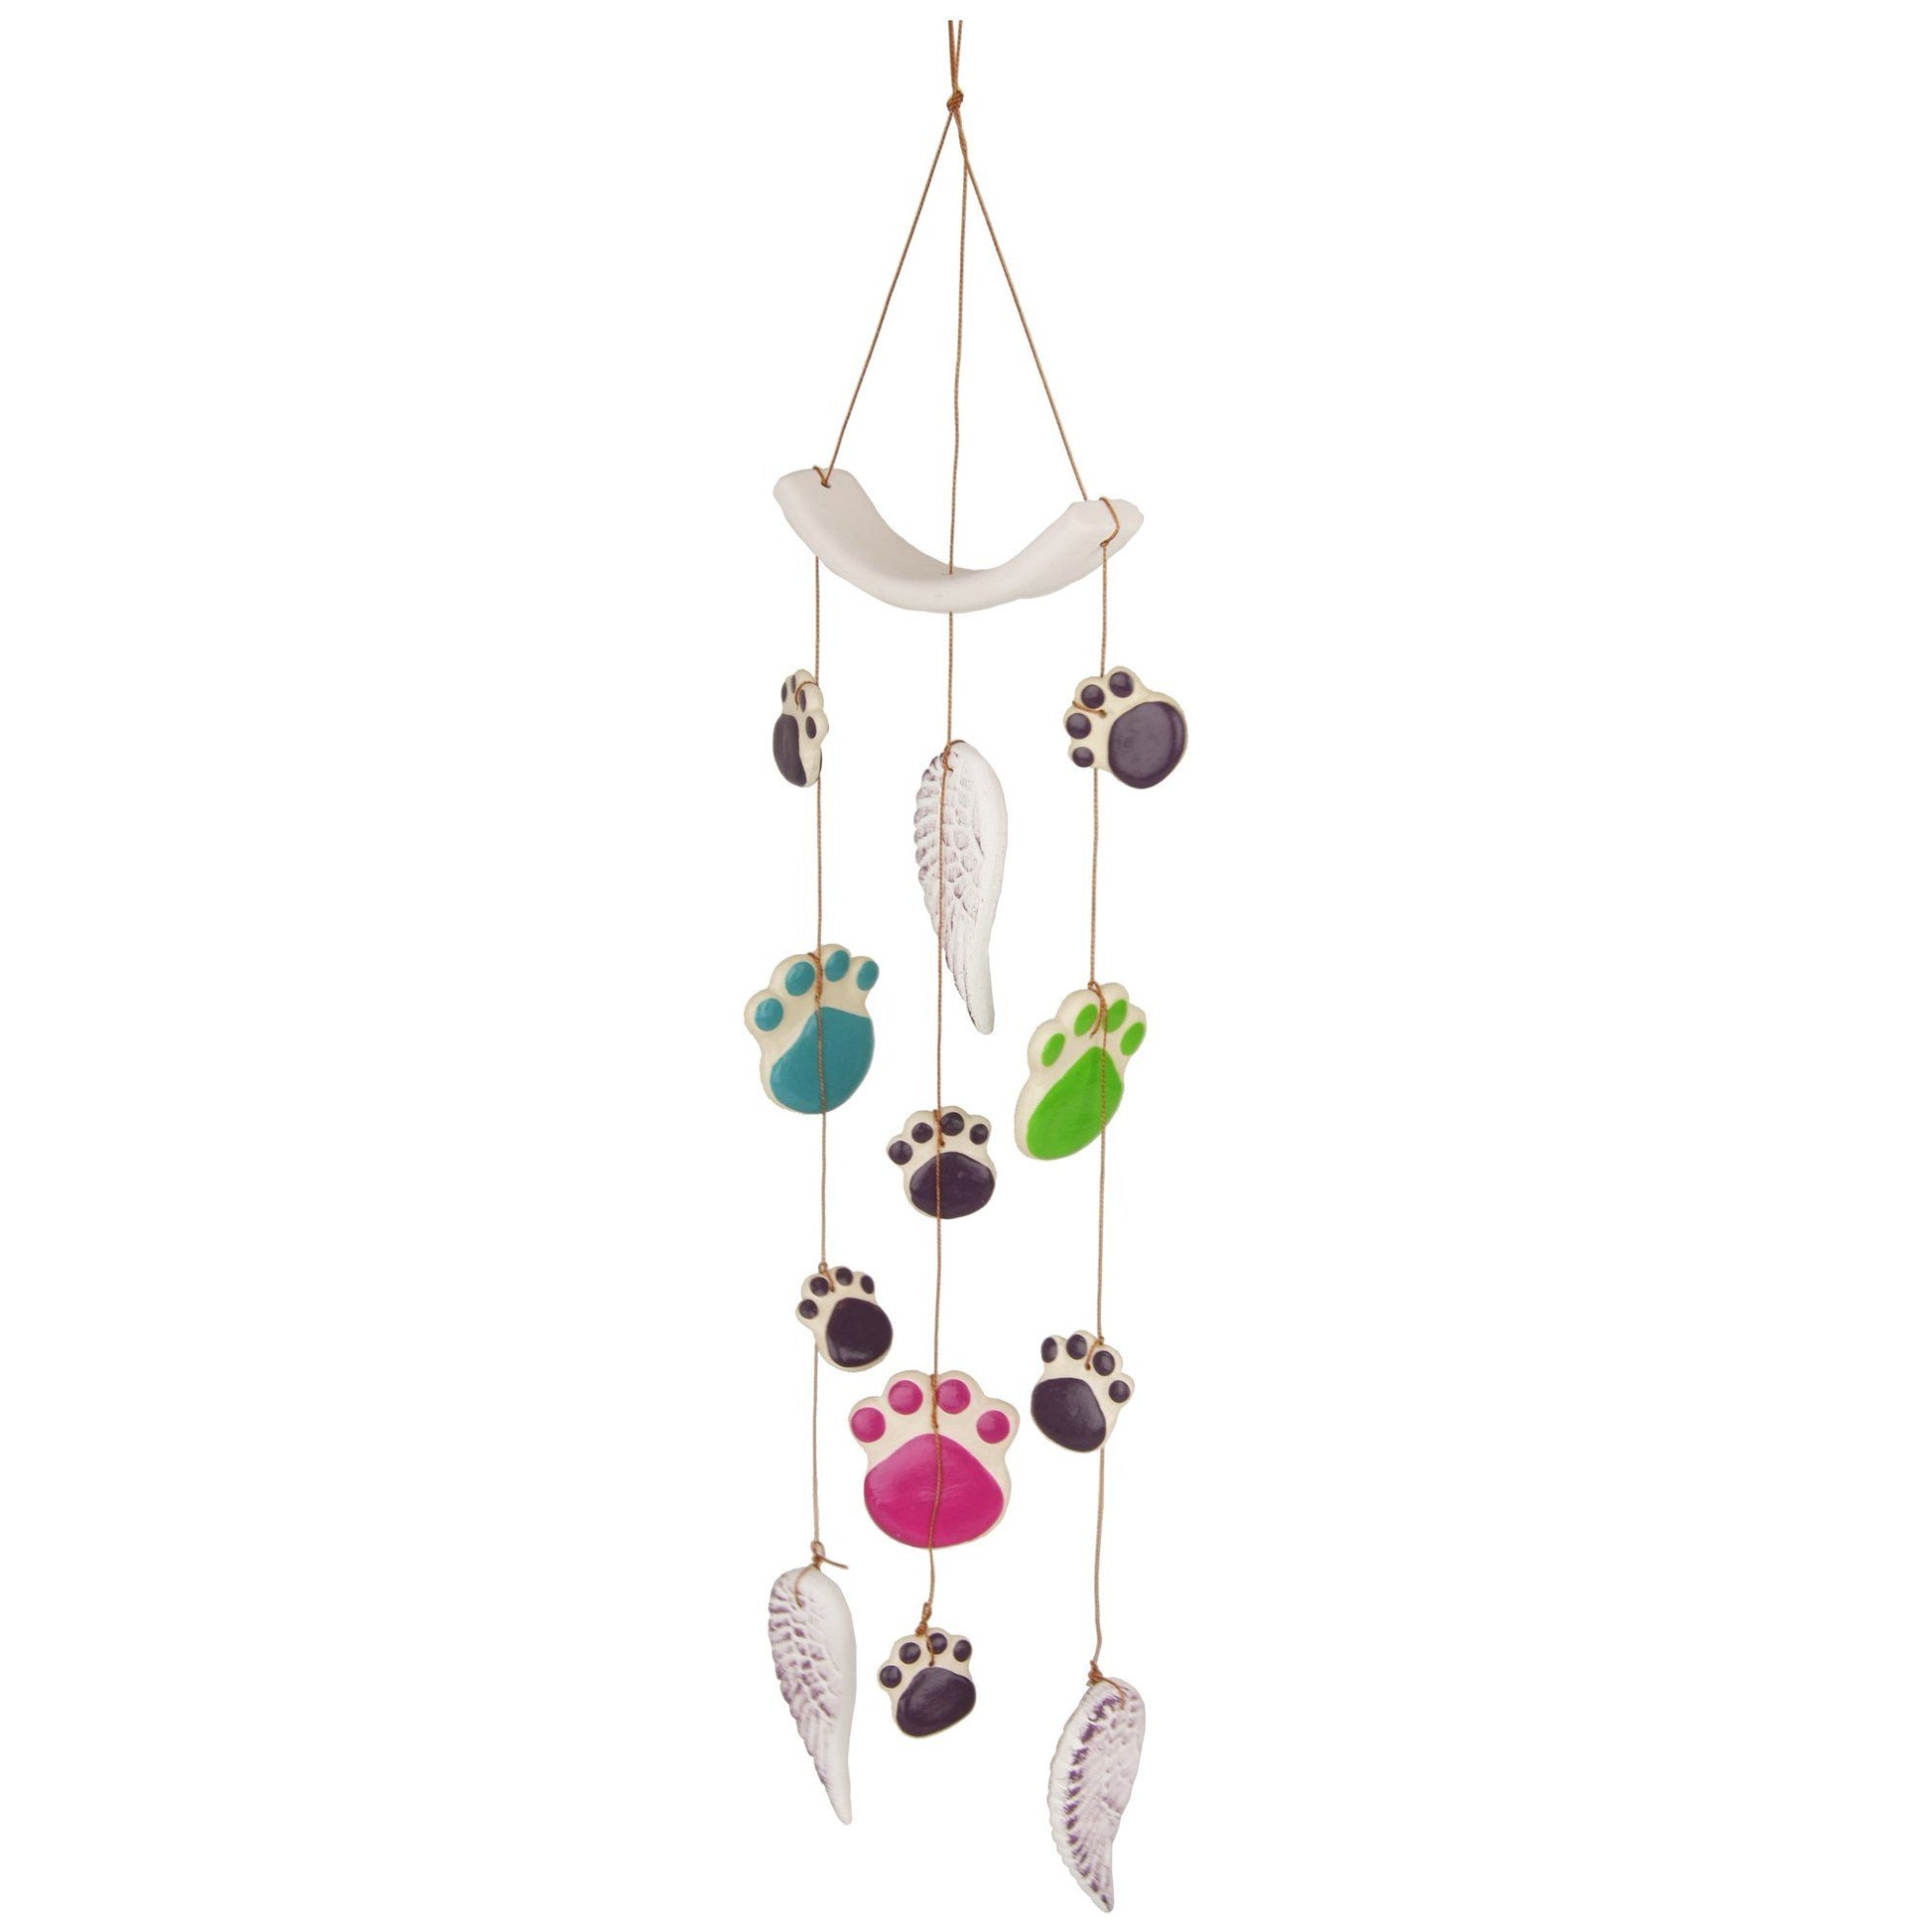 Paws Of Love Ceramic Wind Chime